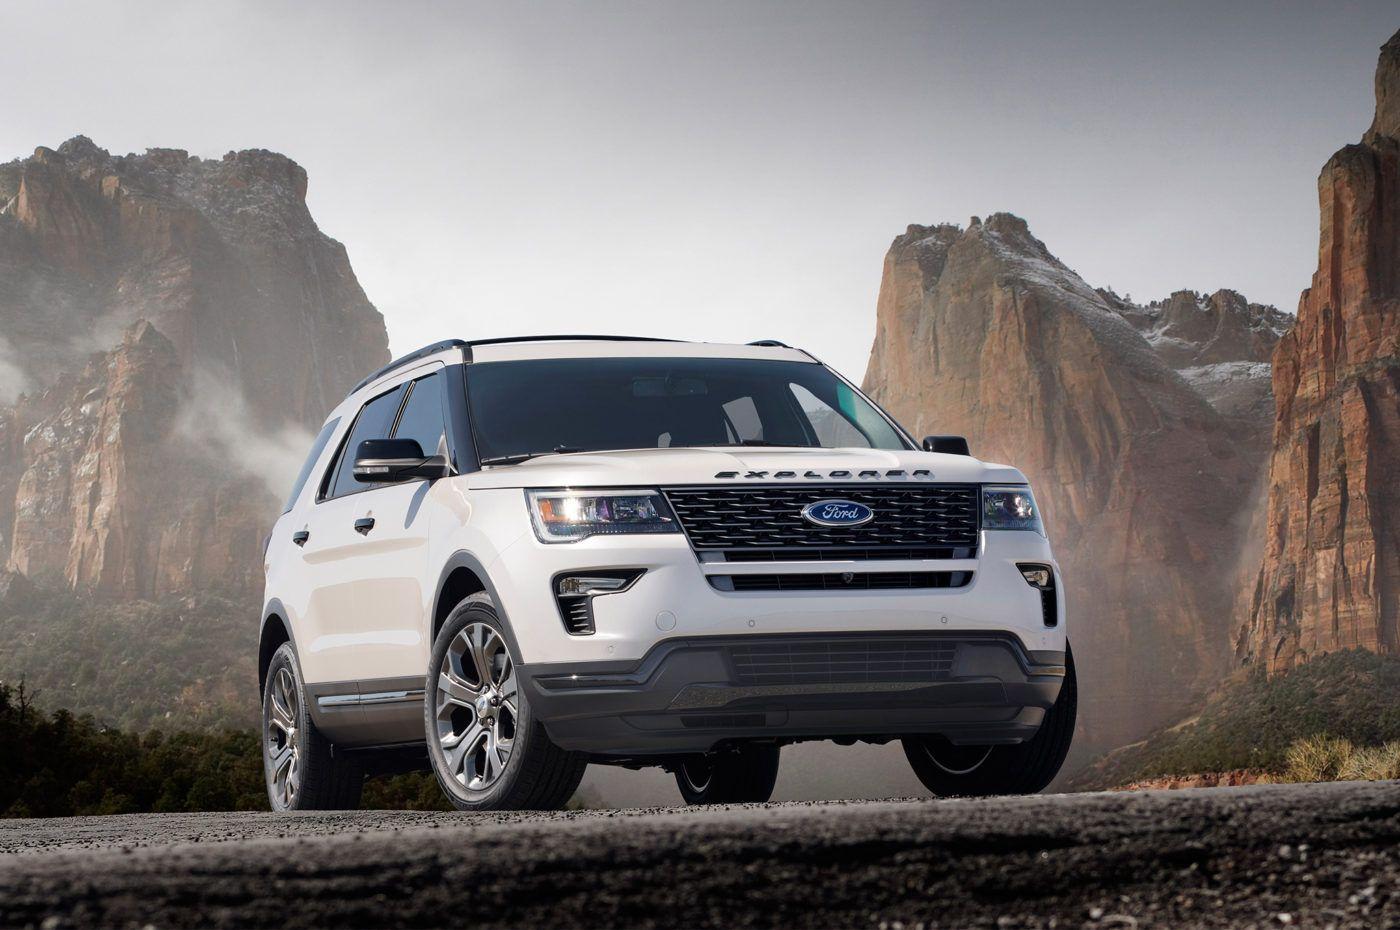 49++ Set Wallpaper In Ford Explorer Sd Card free download